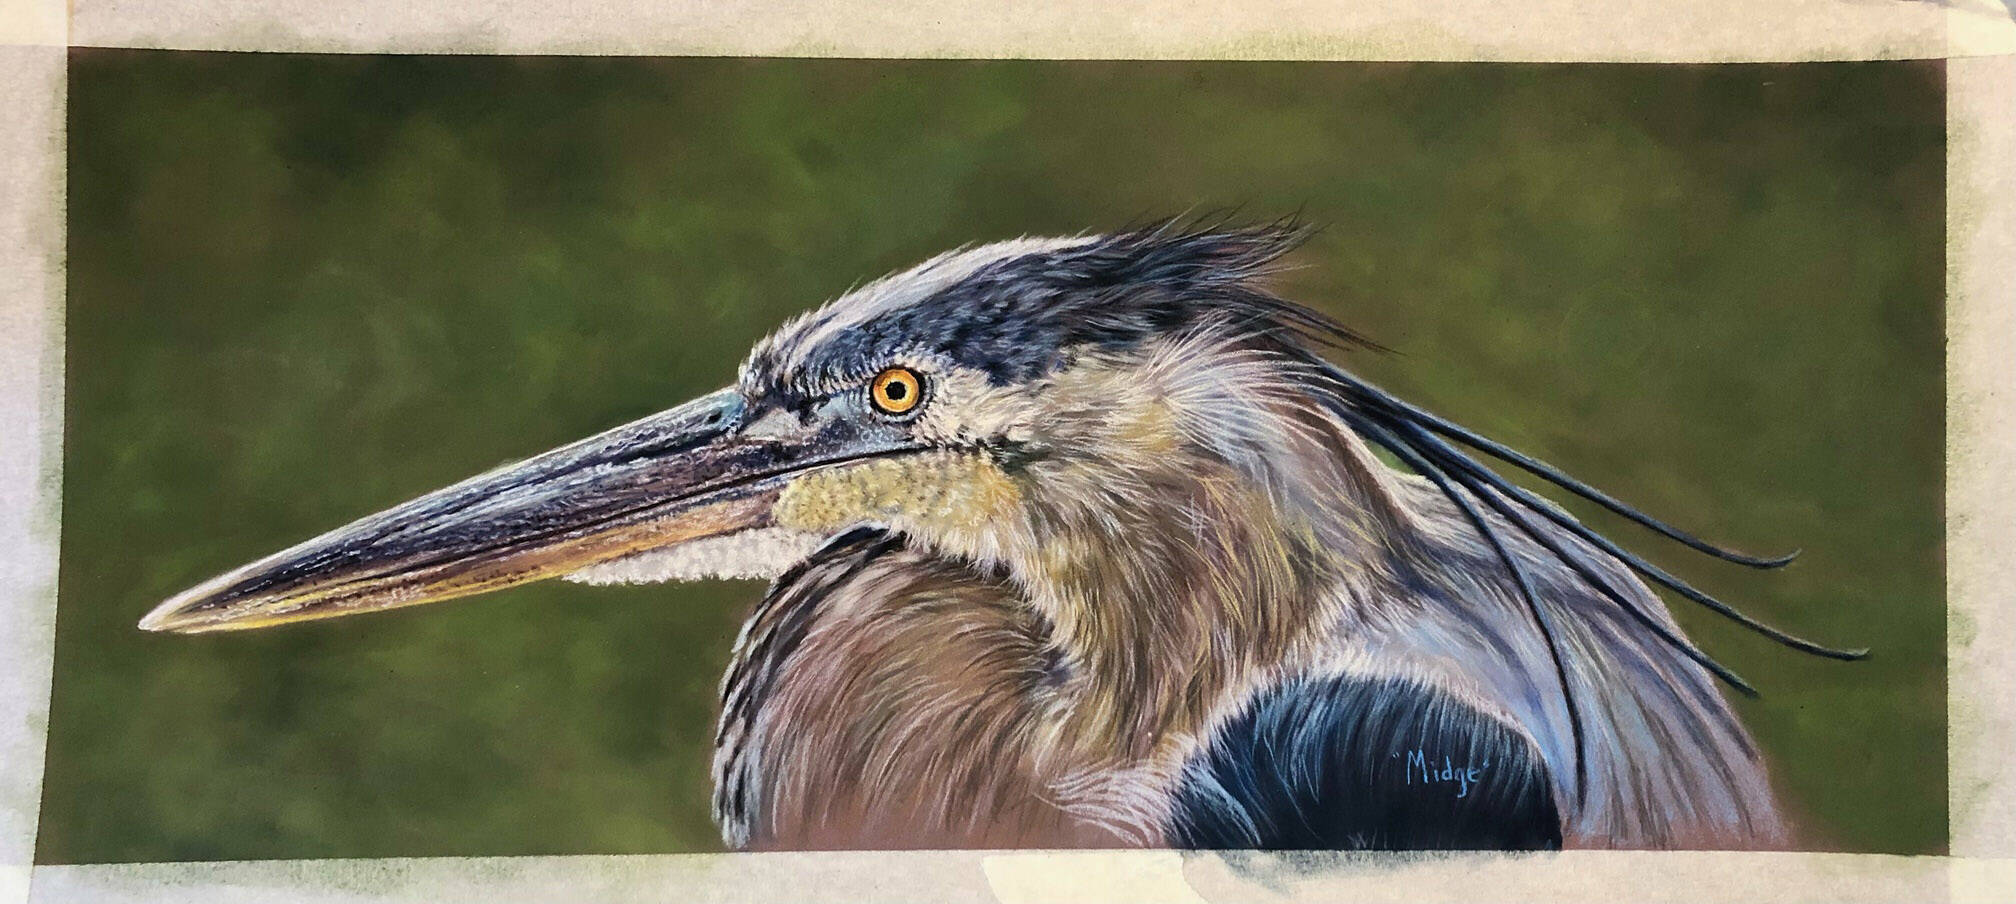 Photo 2023, provided by Grice
“Blue Heron,” a painting by “Midge” Turea M. Grice on display at Fireweed Gallery through March.